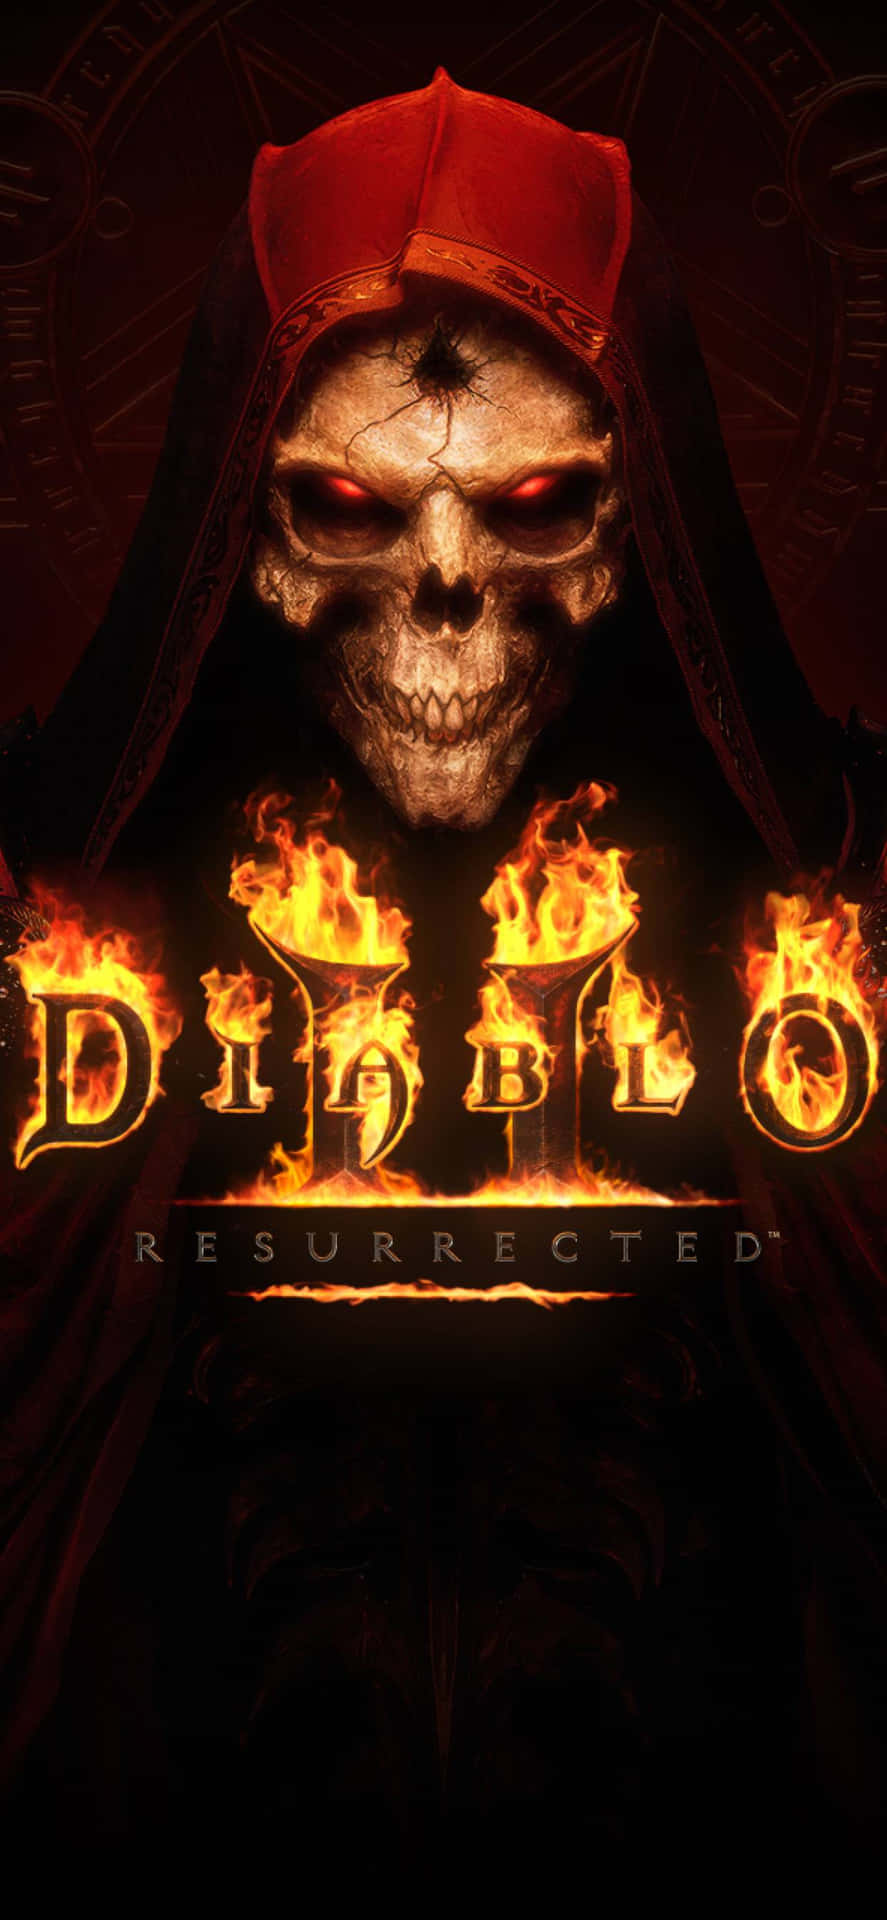 Get ready for the return of Diablo 2 with Resurrected Wallpaper